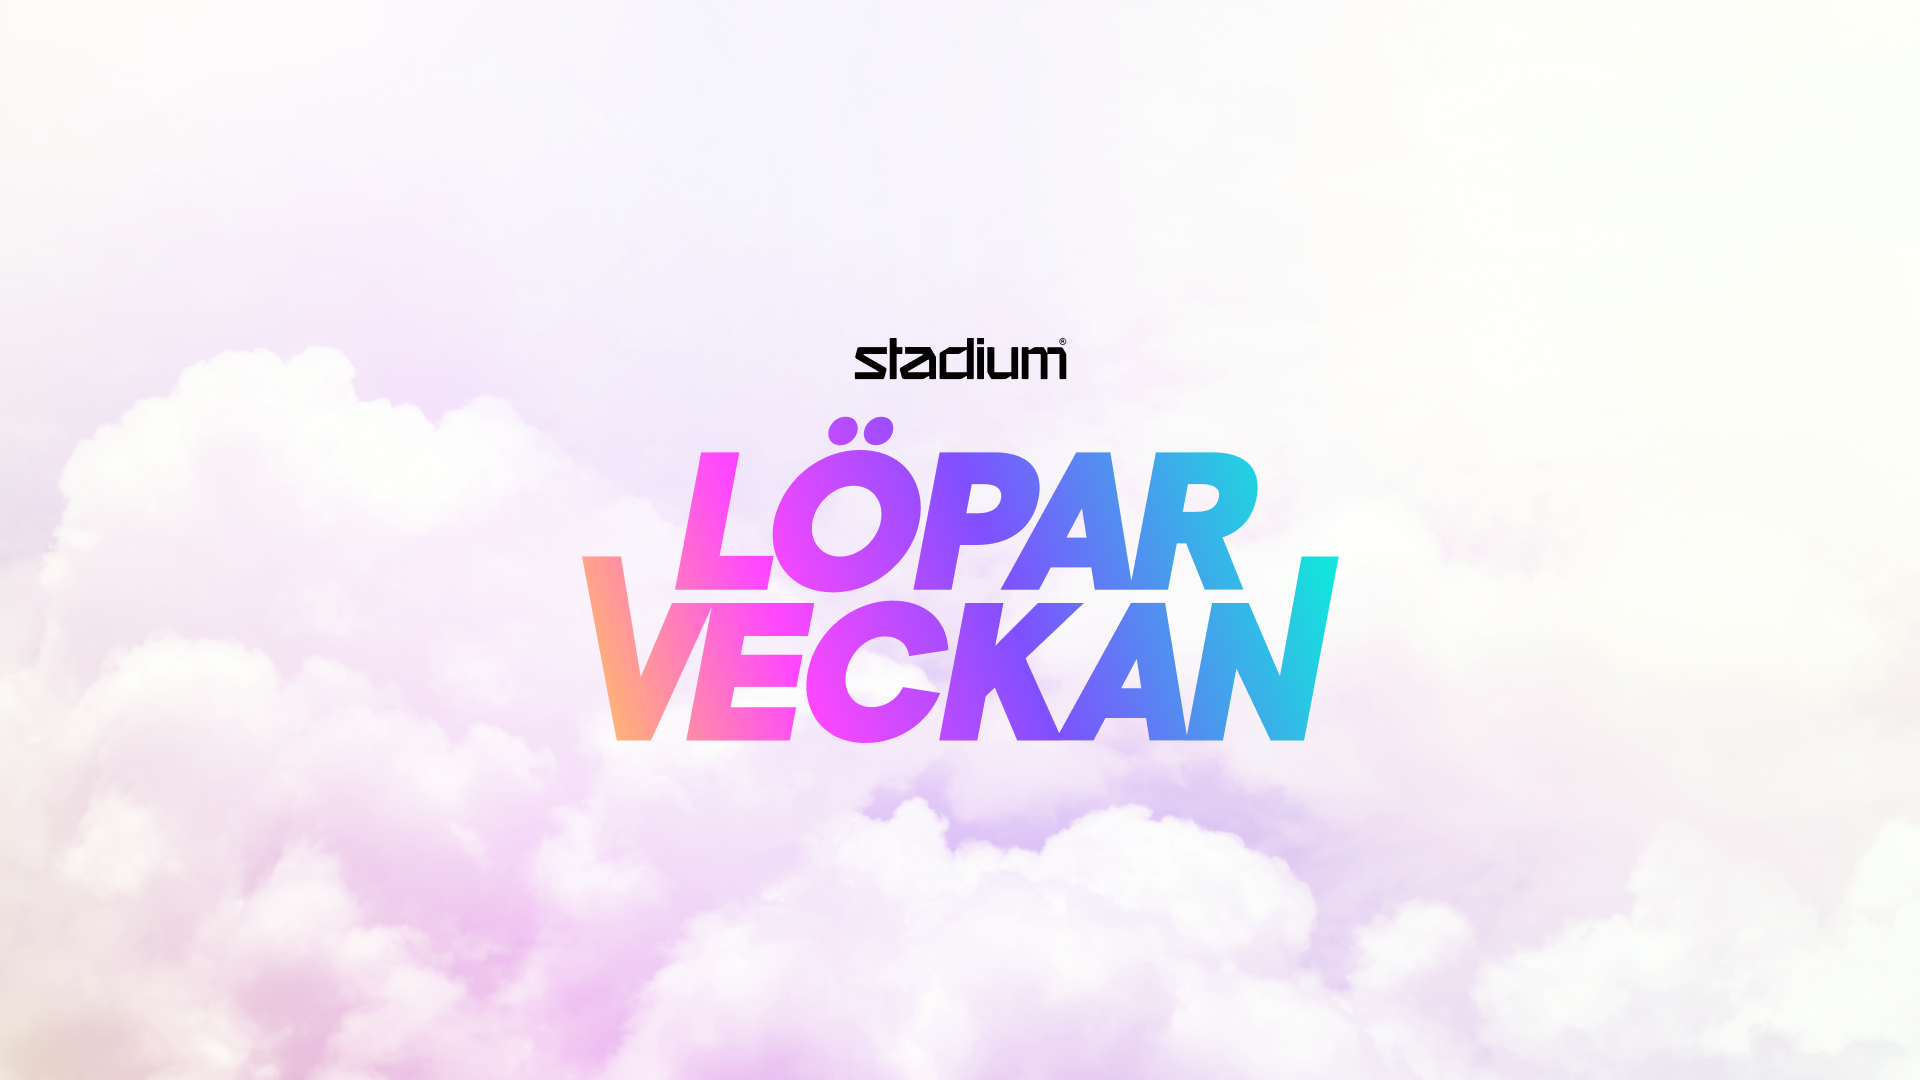 Take part in Stadium Löparveckan the 19-25th of April